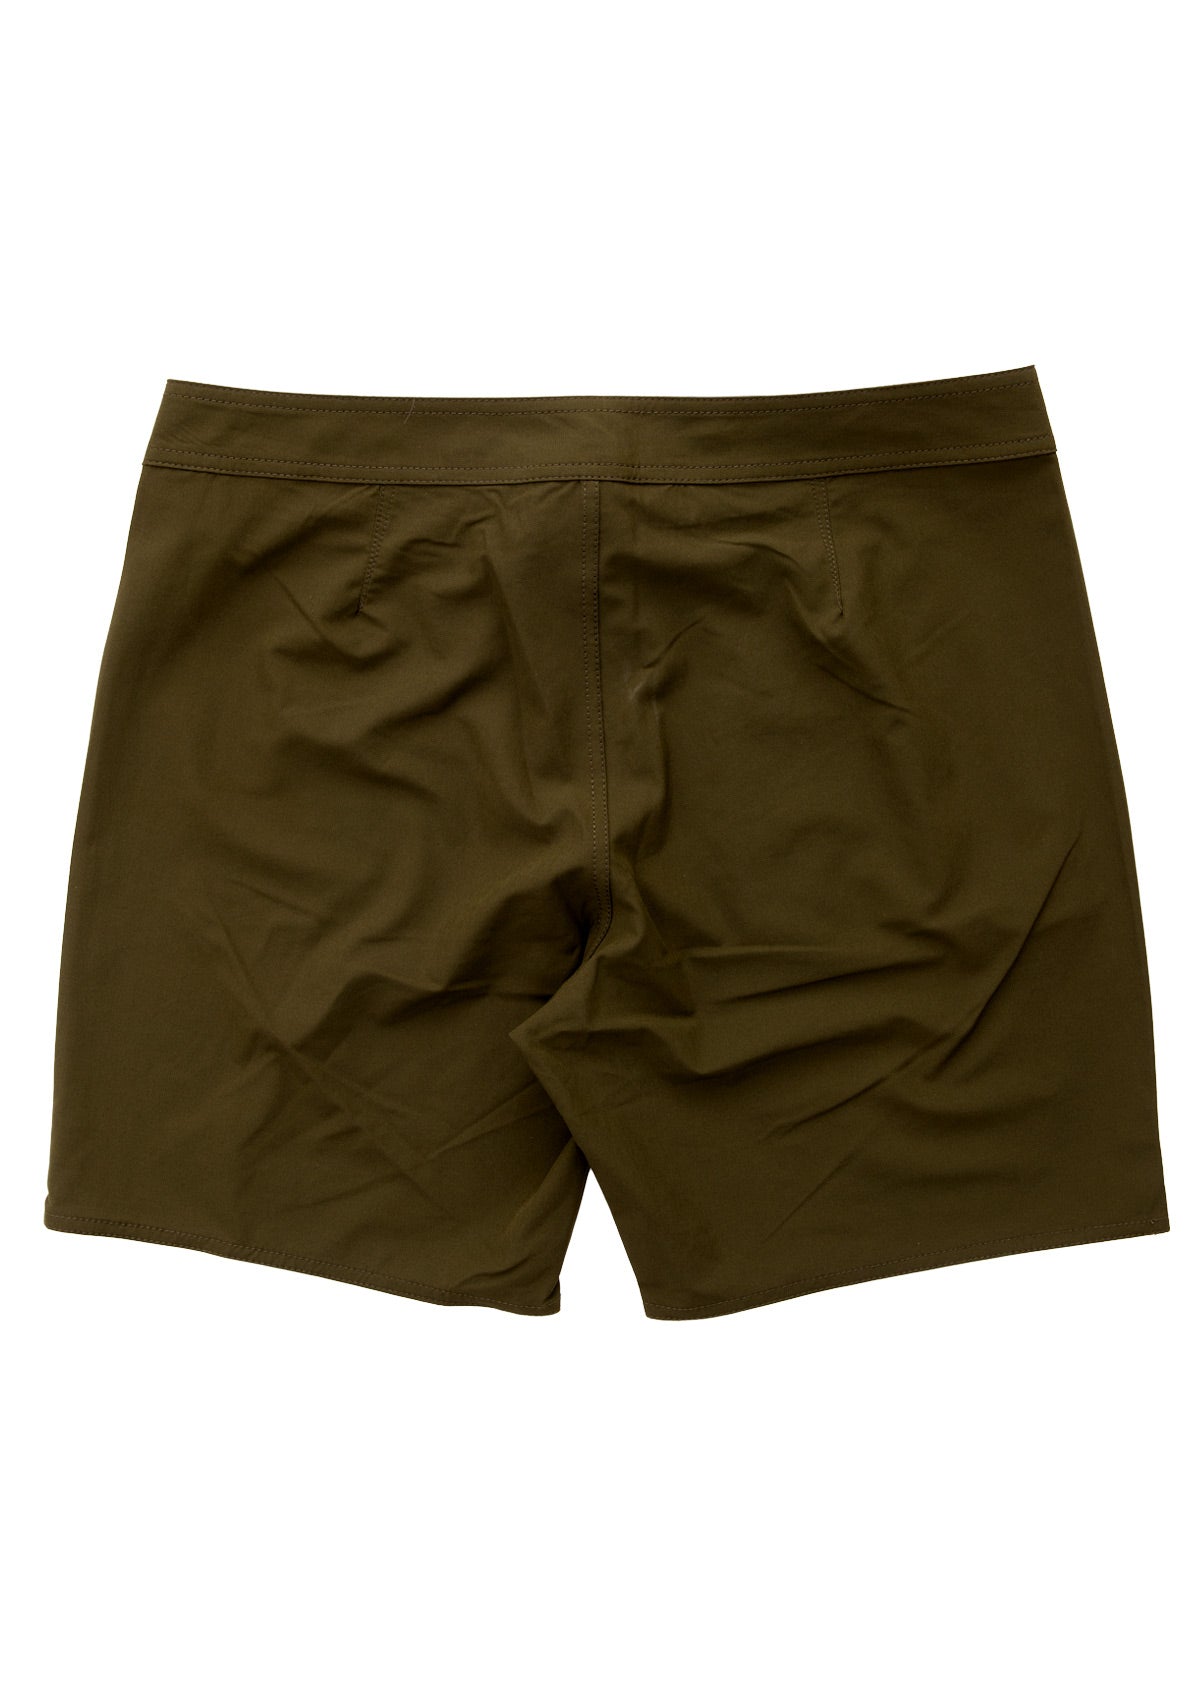 needessentials side mens surfing boardshorts non branded olive swimming